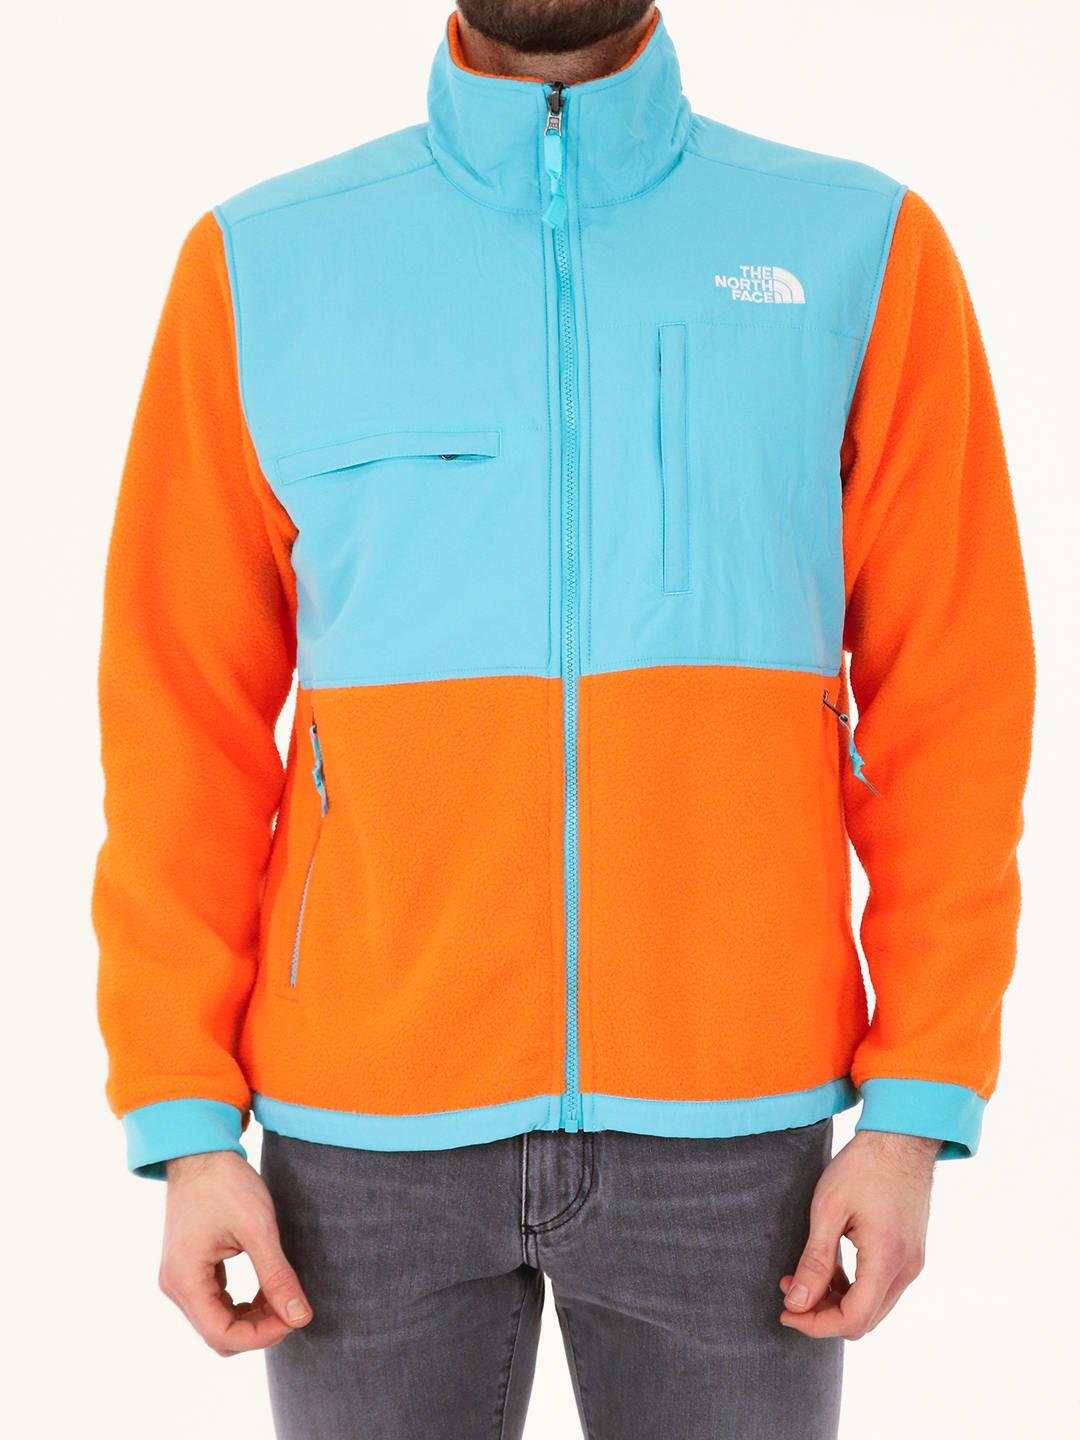 for Men Mens Jackets The North Face Jackets The North Face Denali 2 Jacket in Teal Blue 